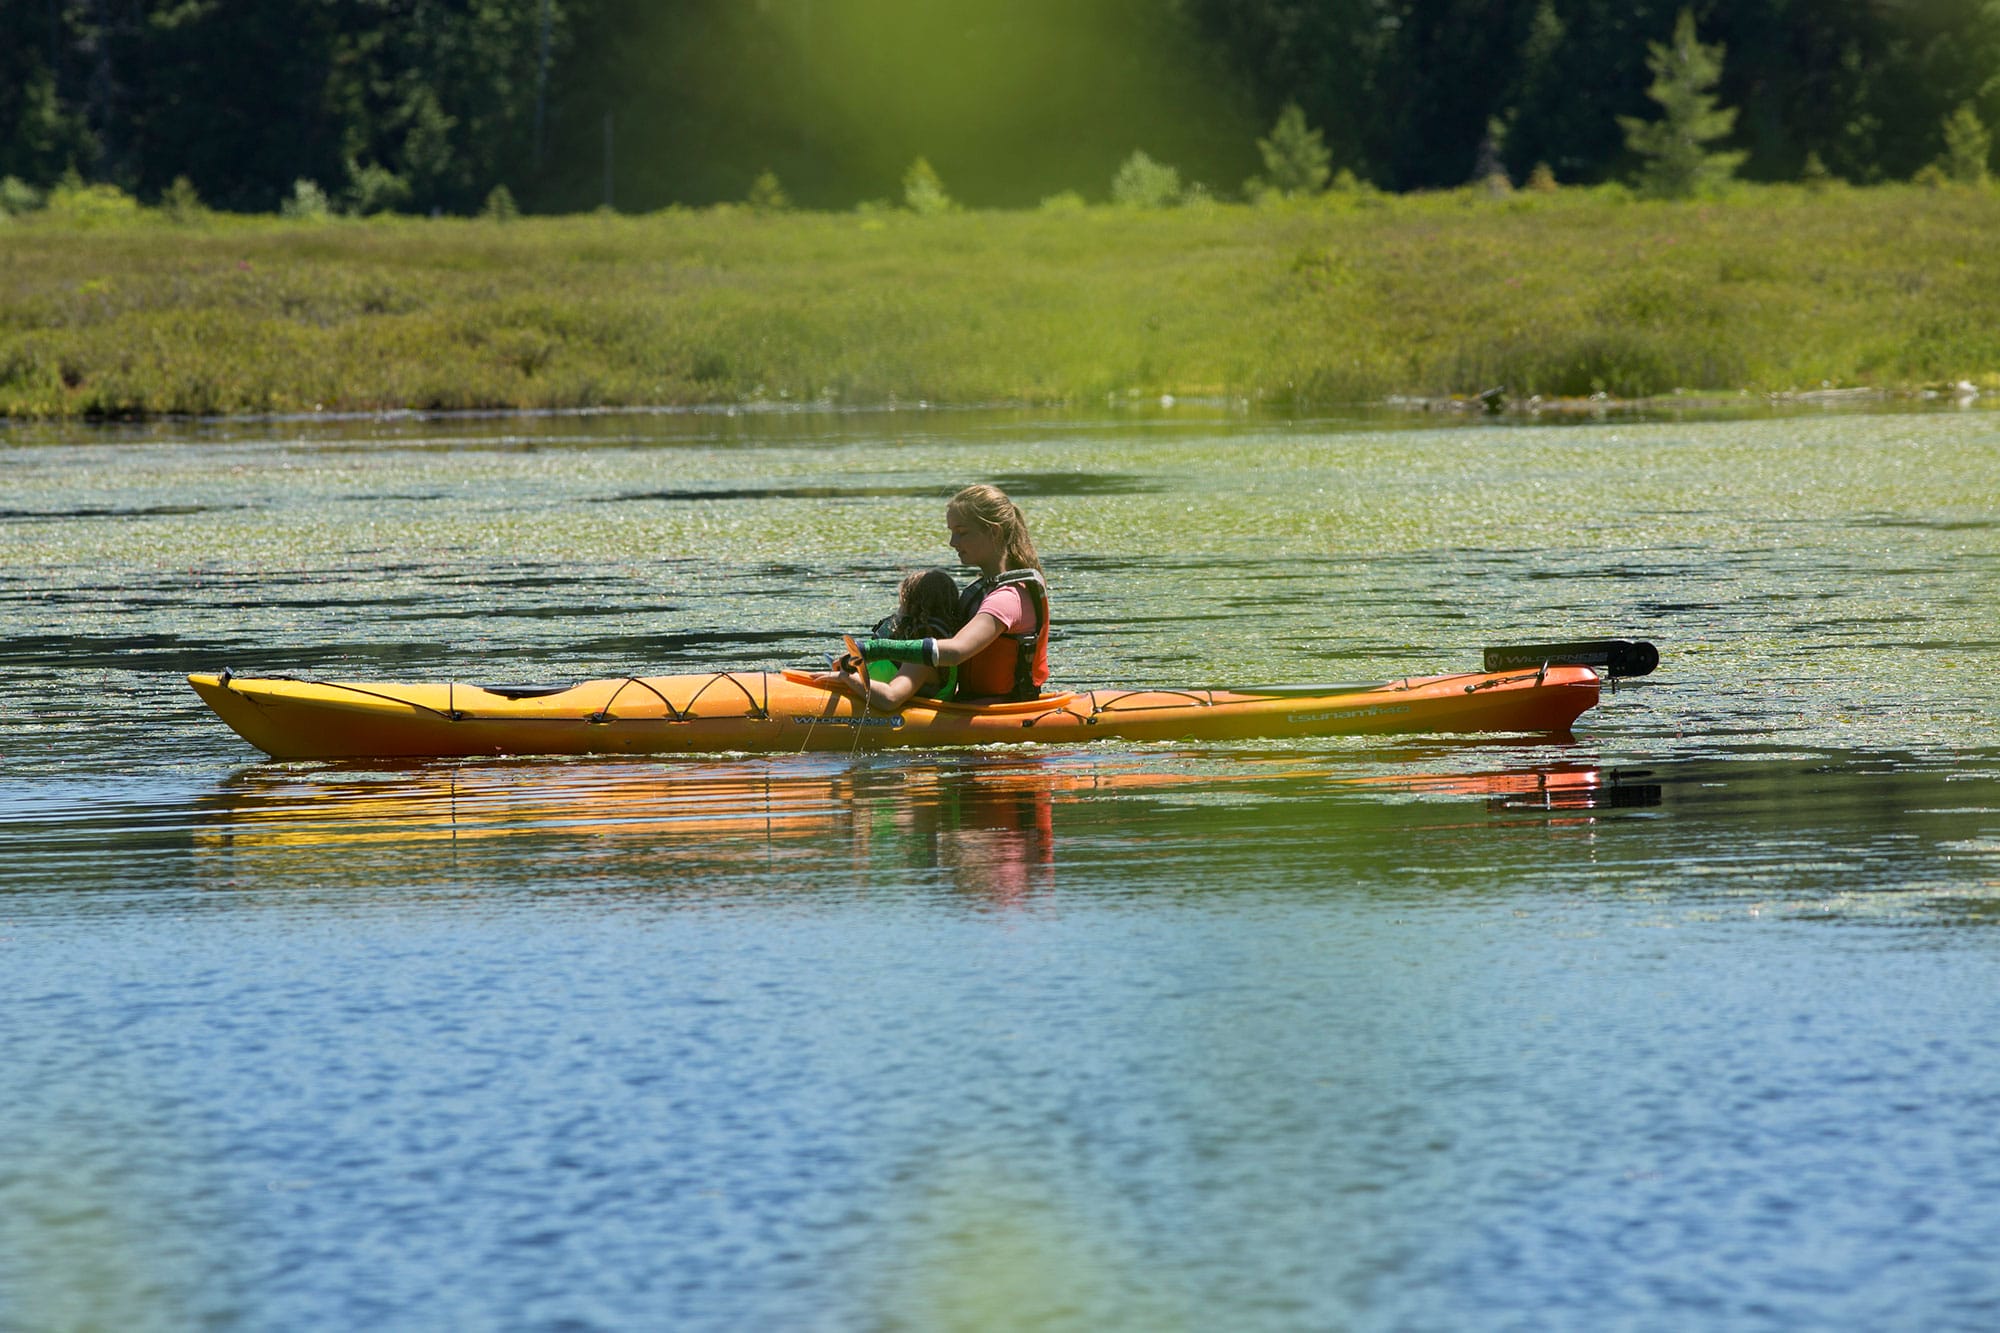 A woman is paddling a kayak in a body of water.